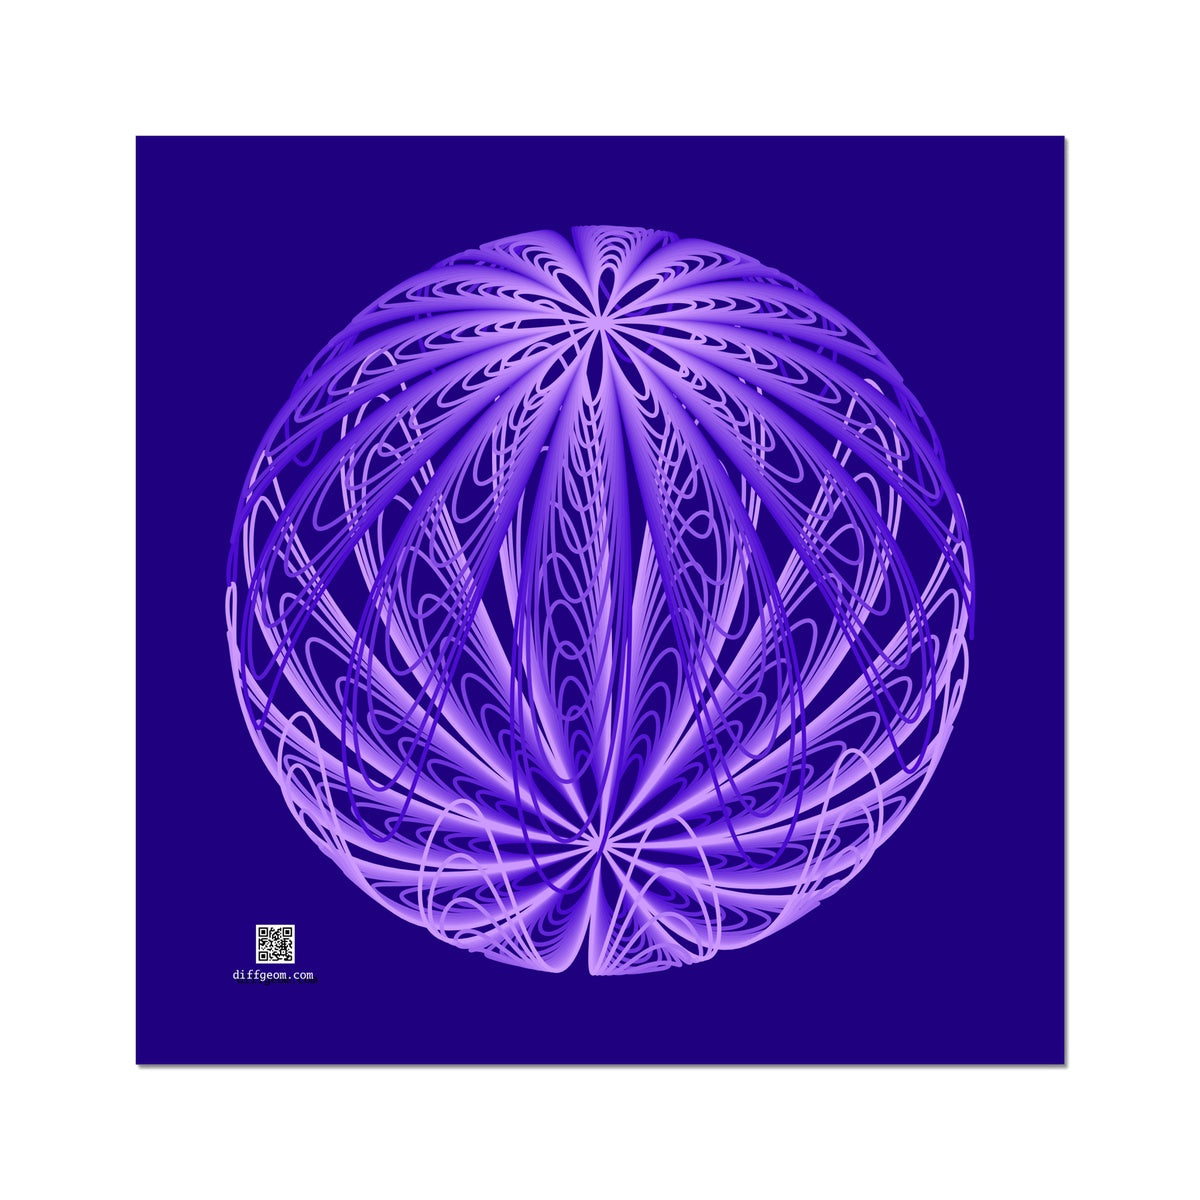 Dipole, Xray Sphere Wall Art Poster